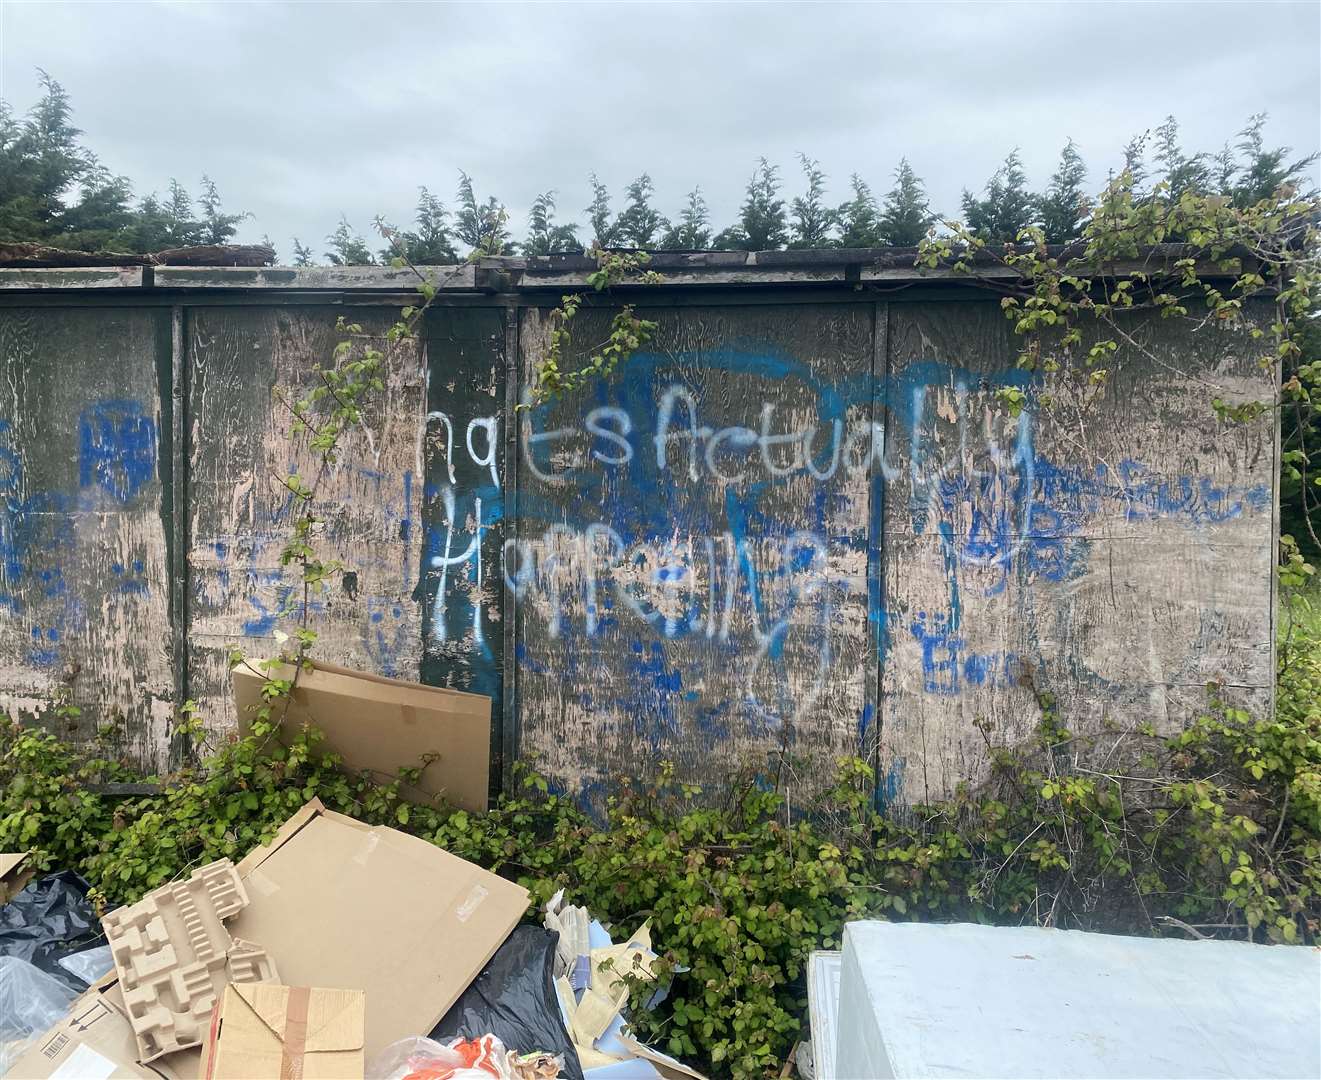 One vandal asks ‘What’s actually happening?’ – a very good question